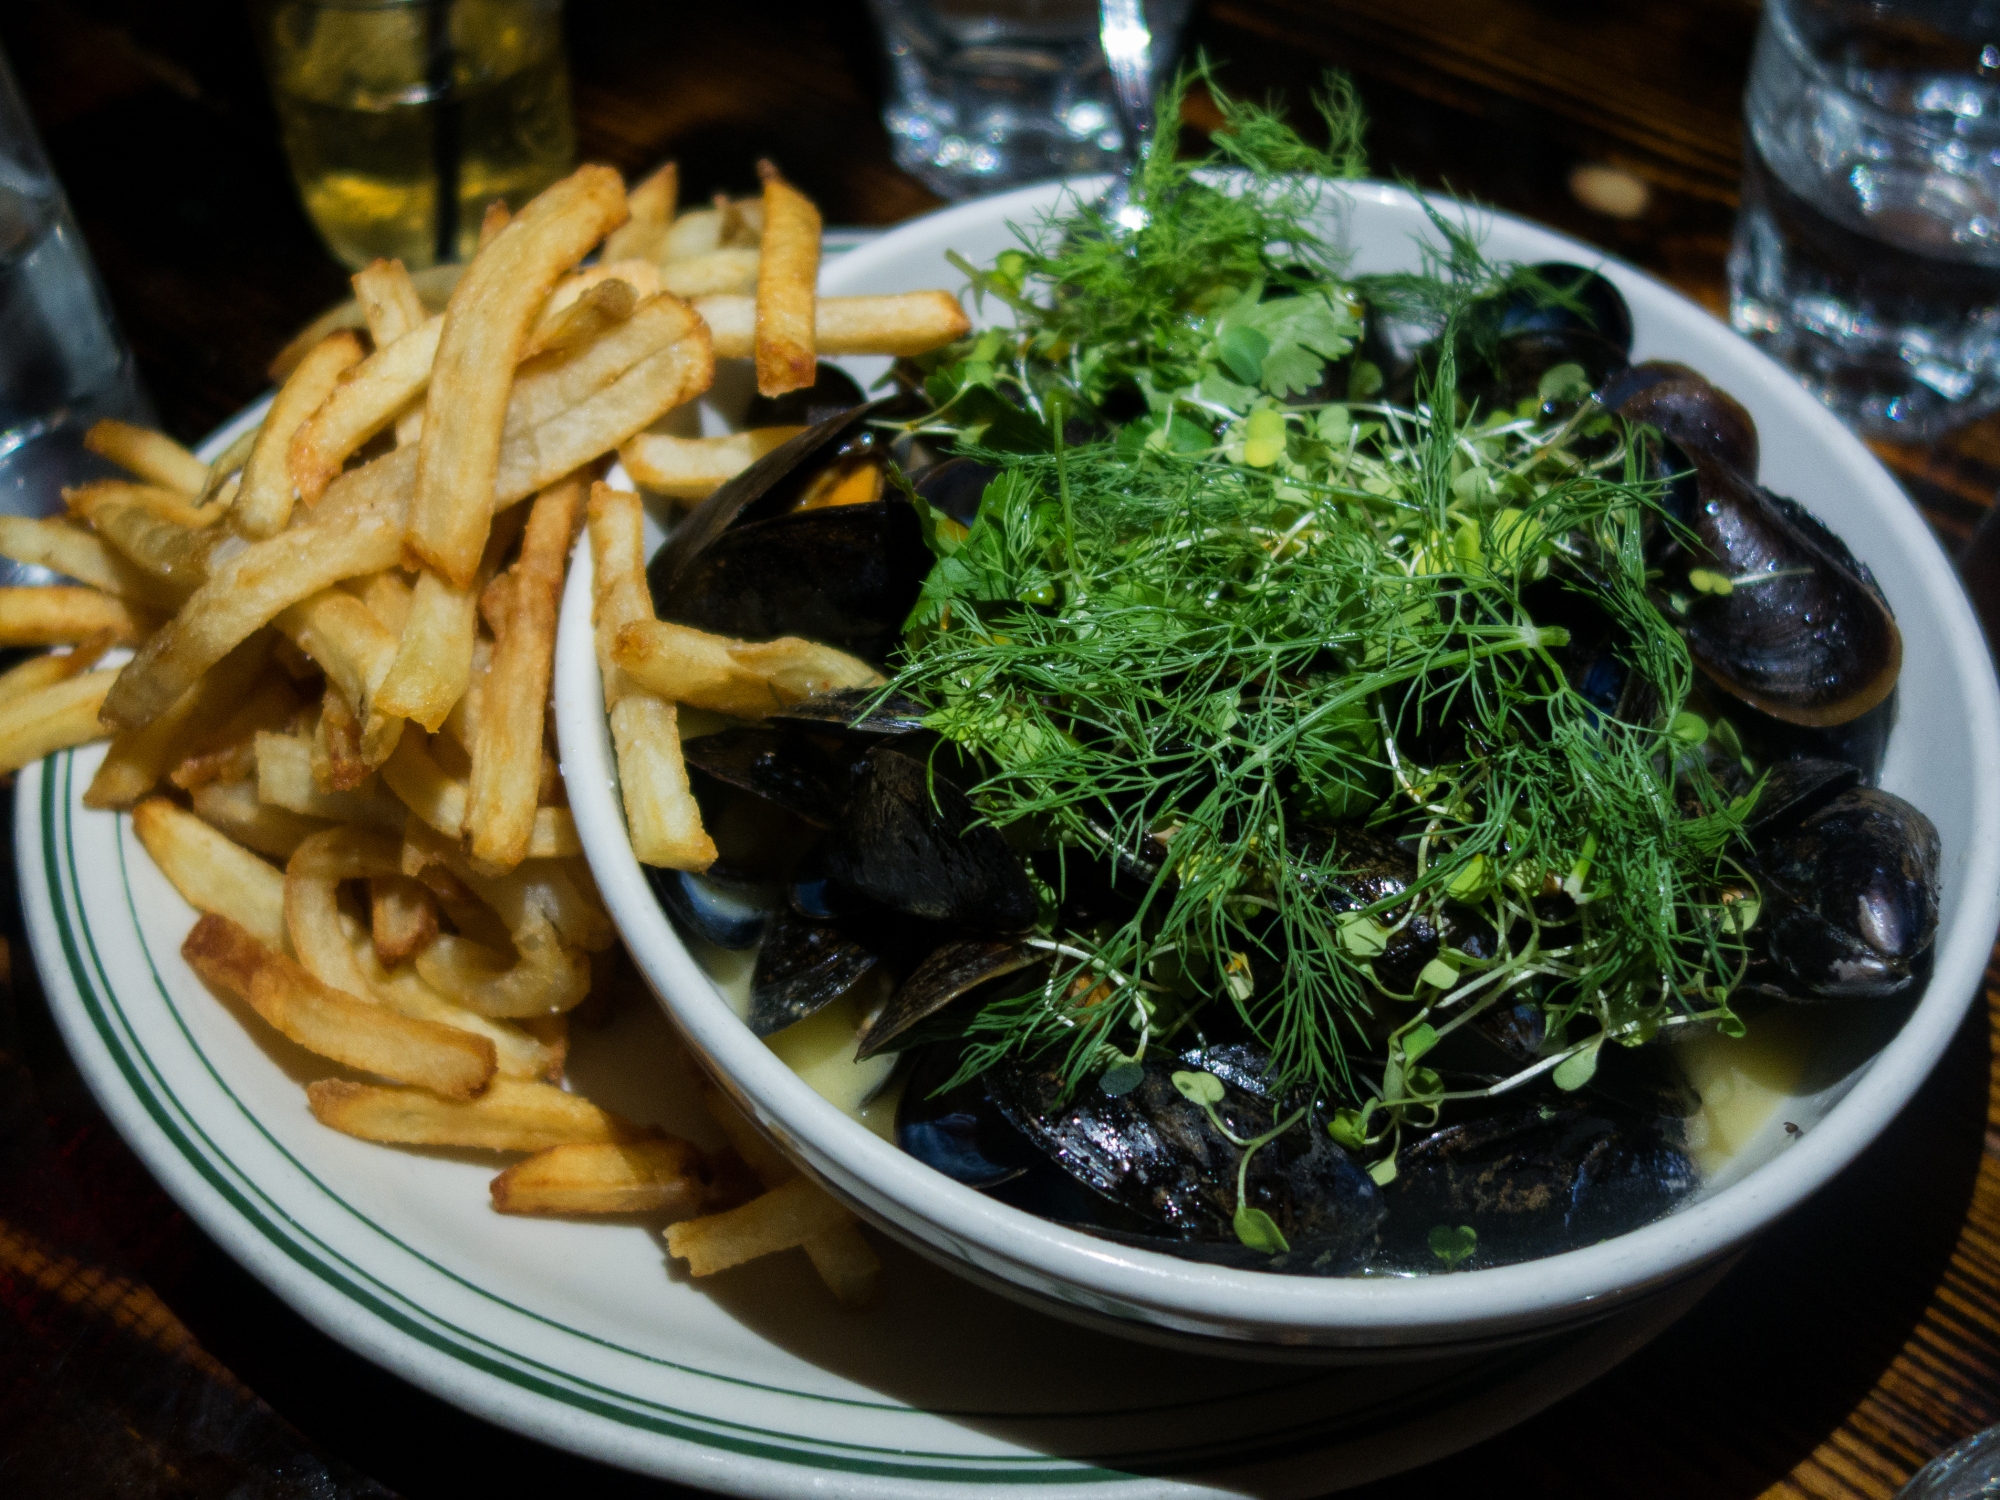 Jacob’s Pickles – White Wine Mussels – PEI Mussels in a white wine and butter broth with garlic and onions. Served with fresh cut fries